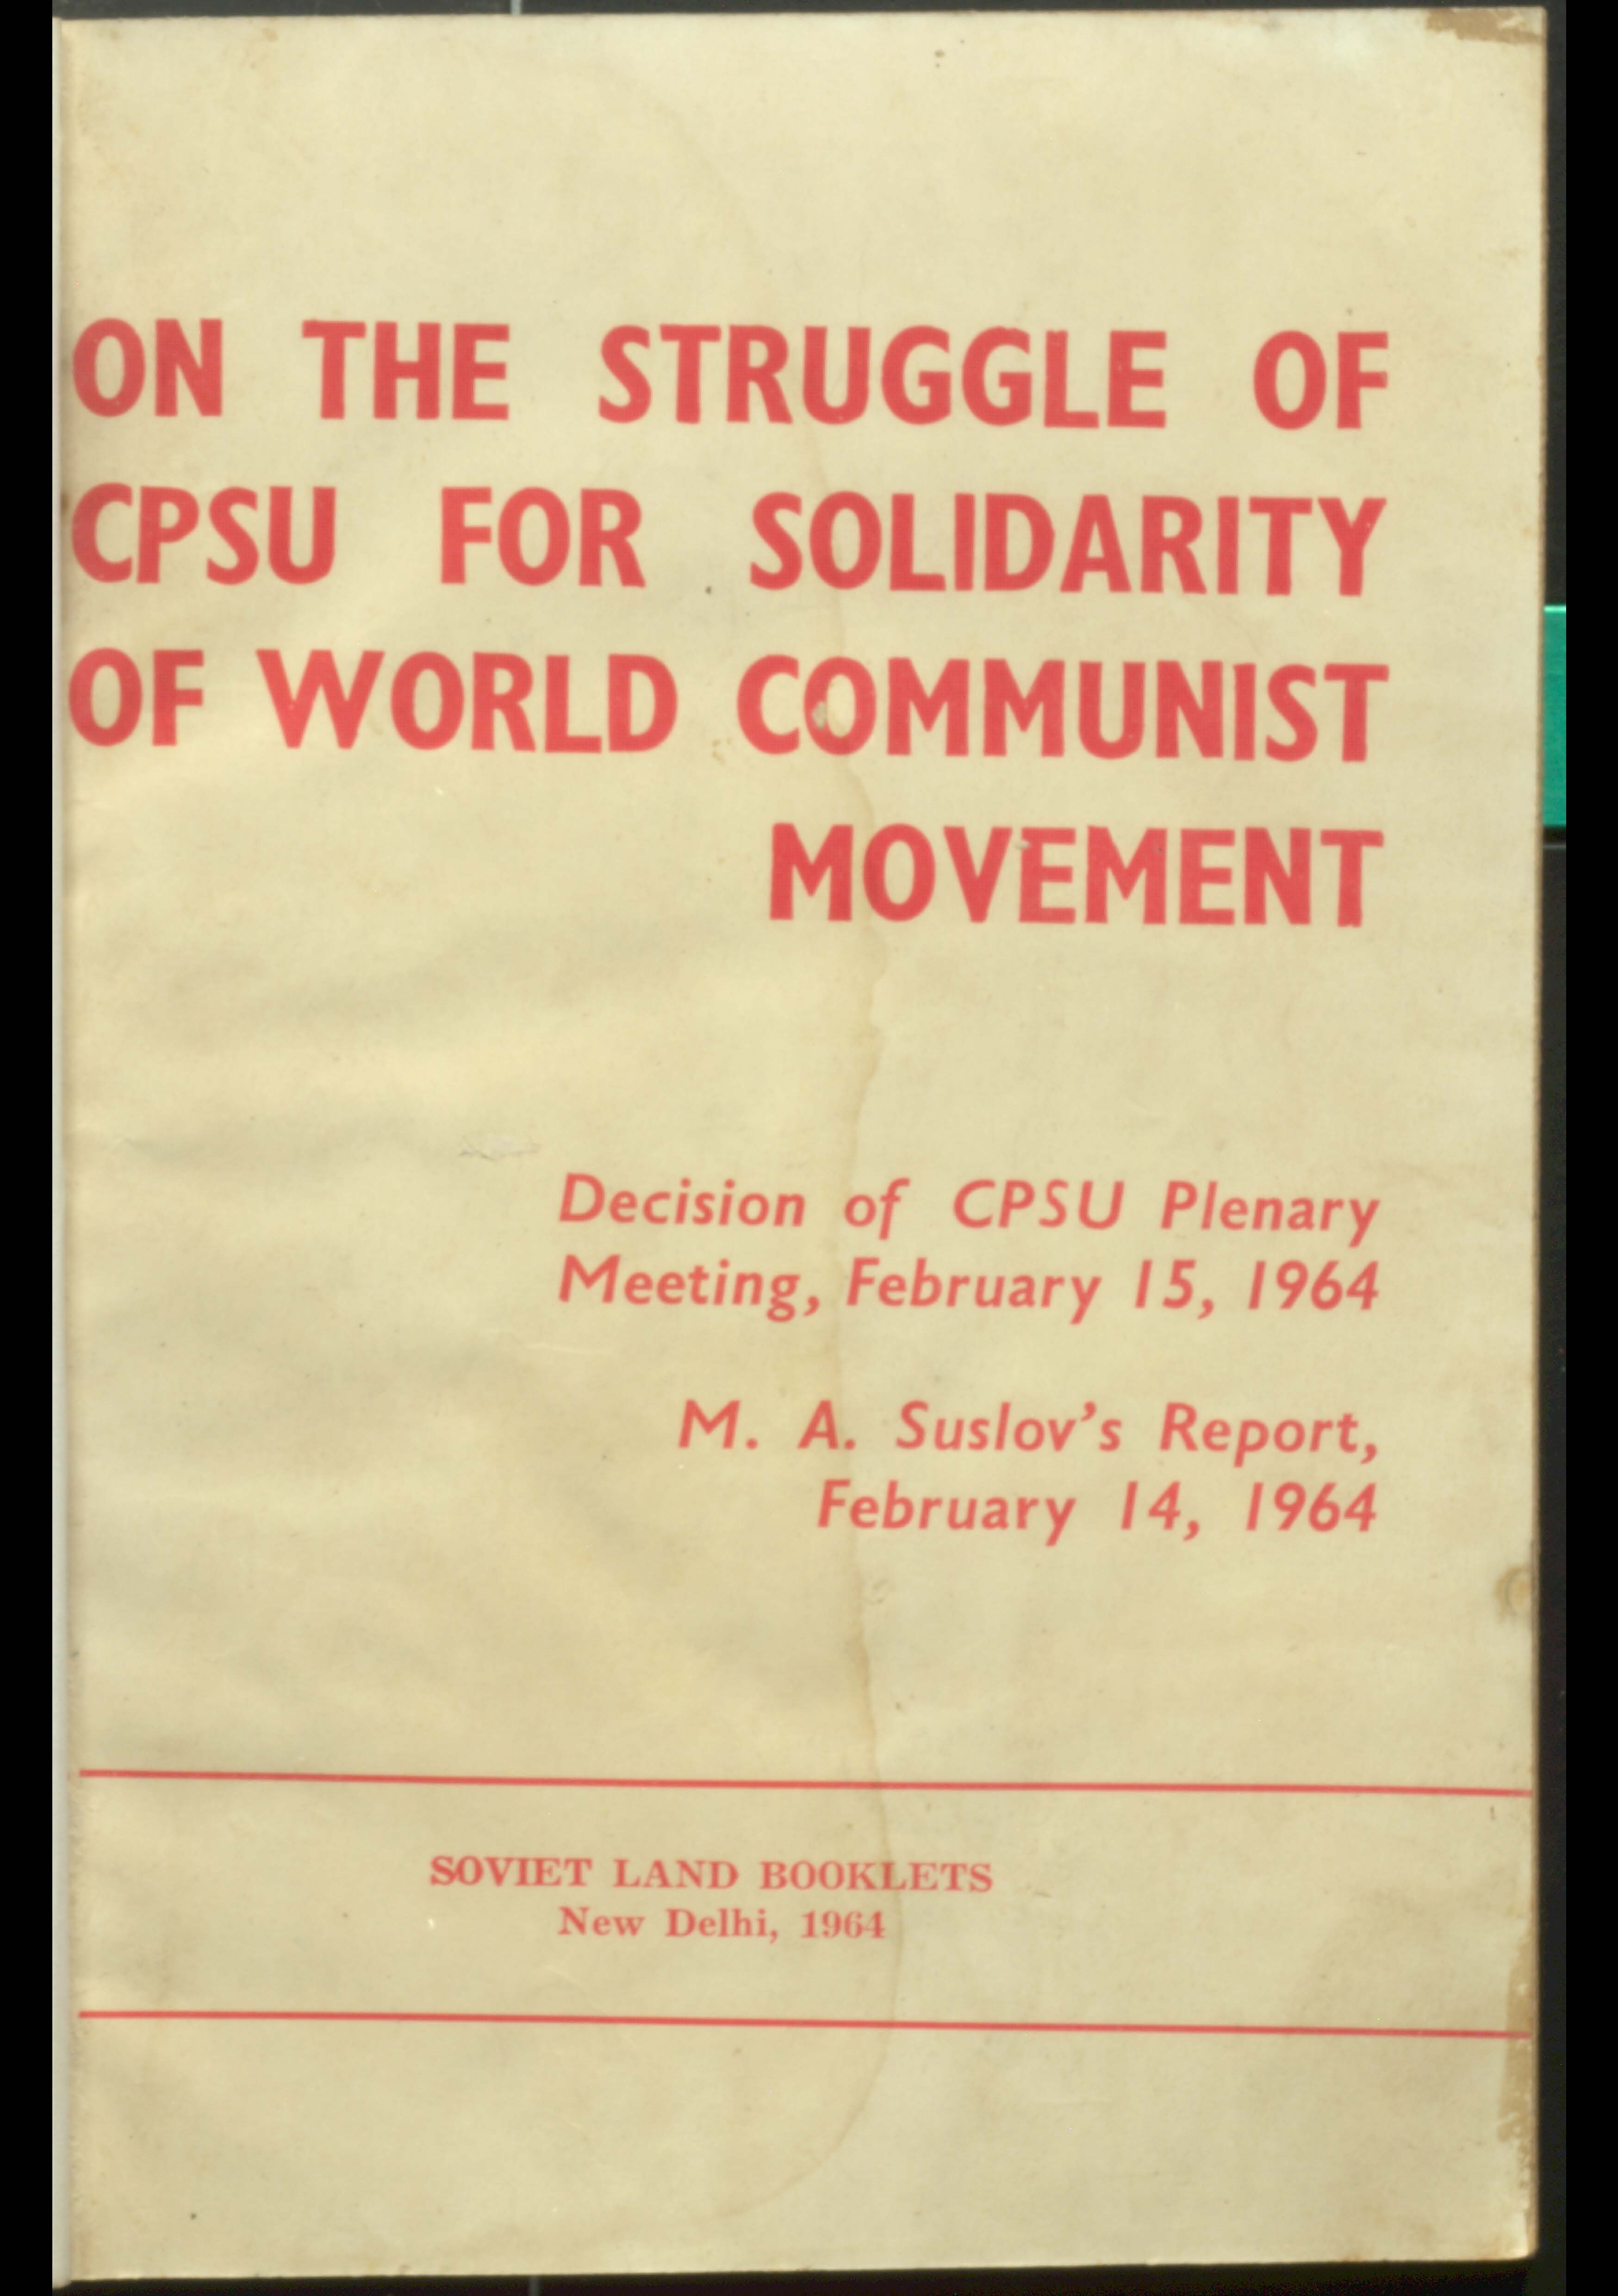 On The Struggle Of CPSU For Solidarity Of World Communist Movement